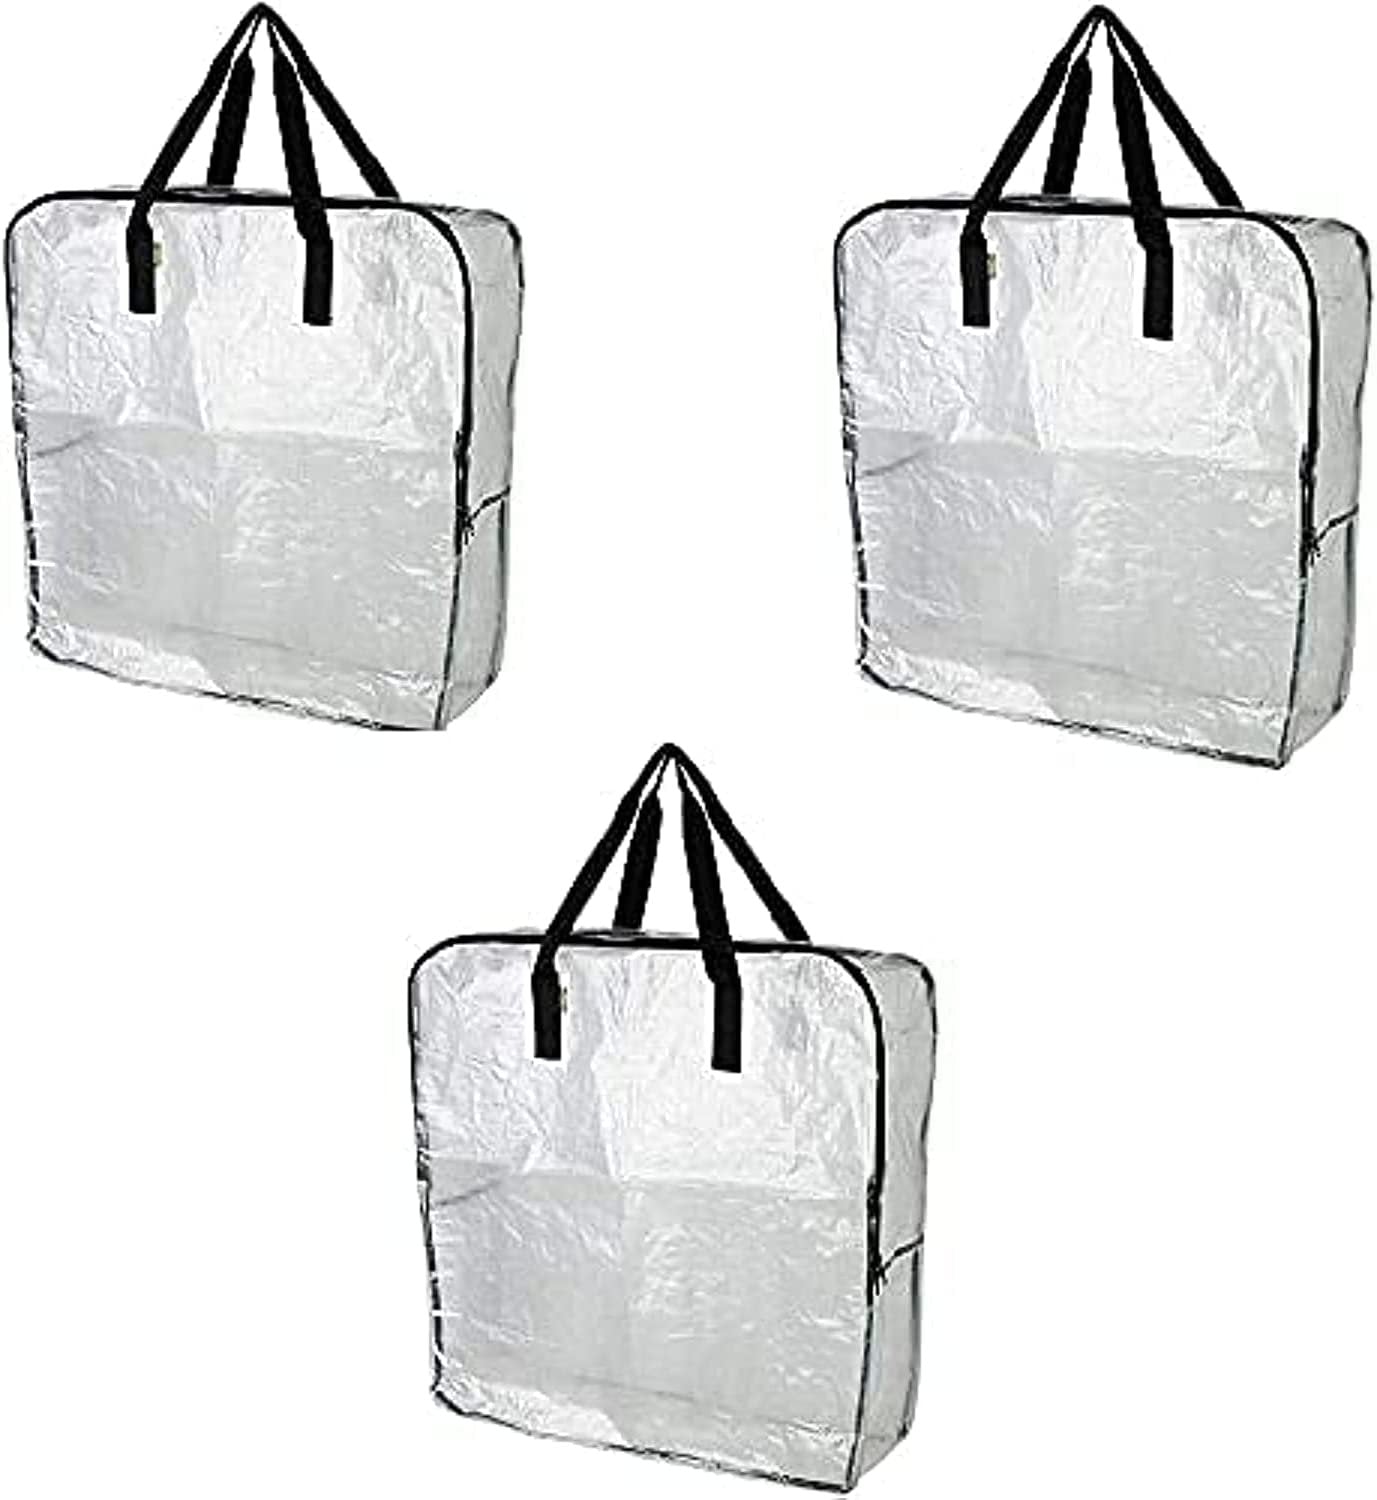 Ikea DIMPA 3 pcs Extra Large Storage Bag, Clear Heavy Duty Bags, Moth and Moisture Protection Storage Bags